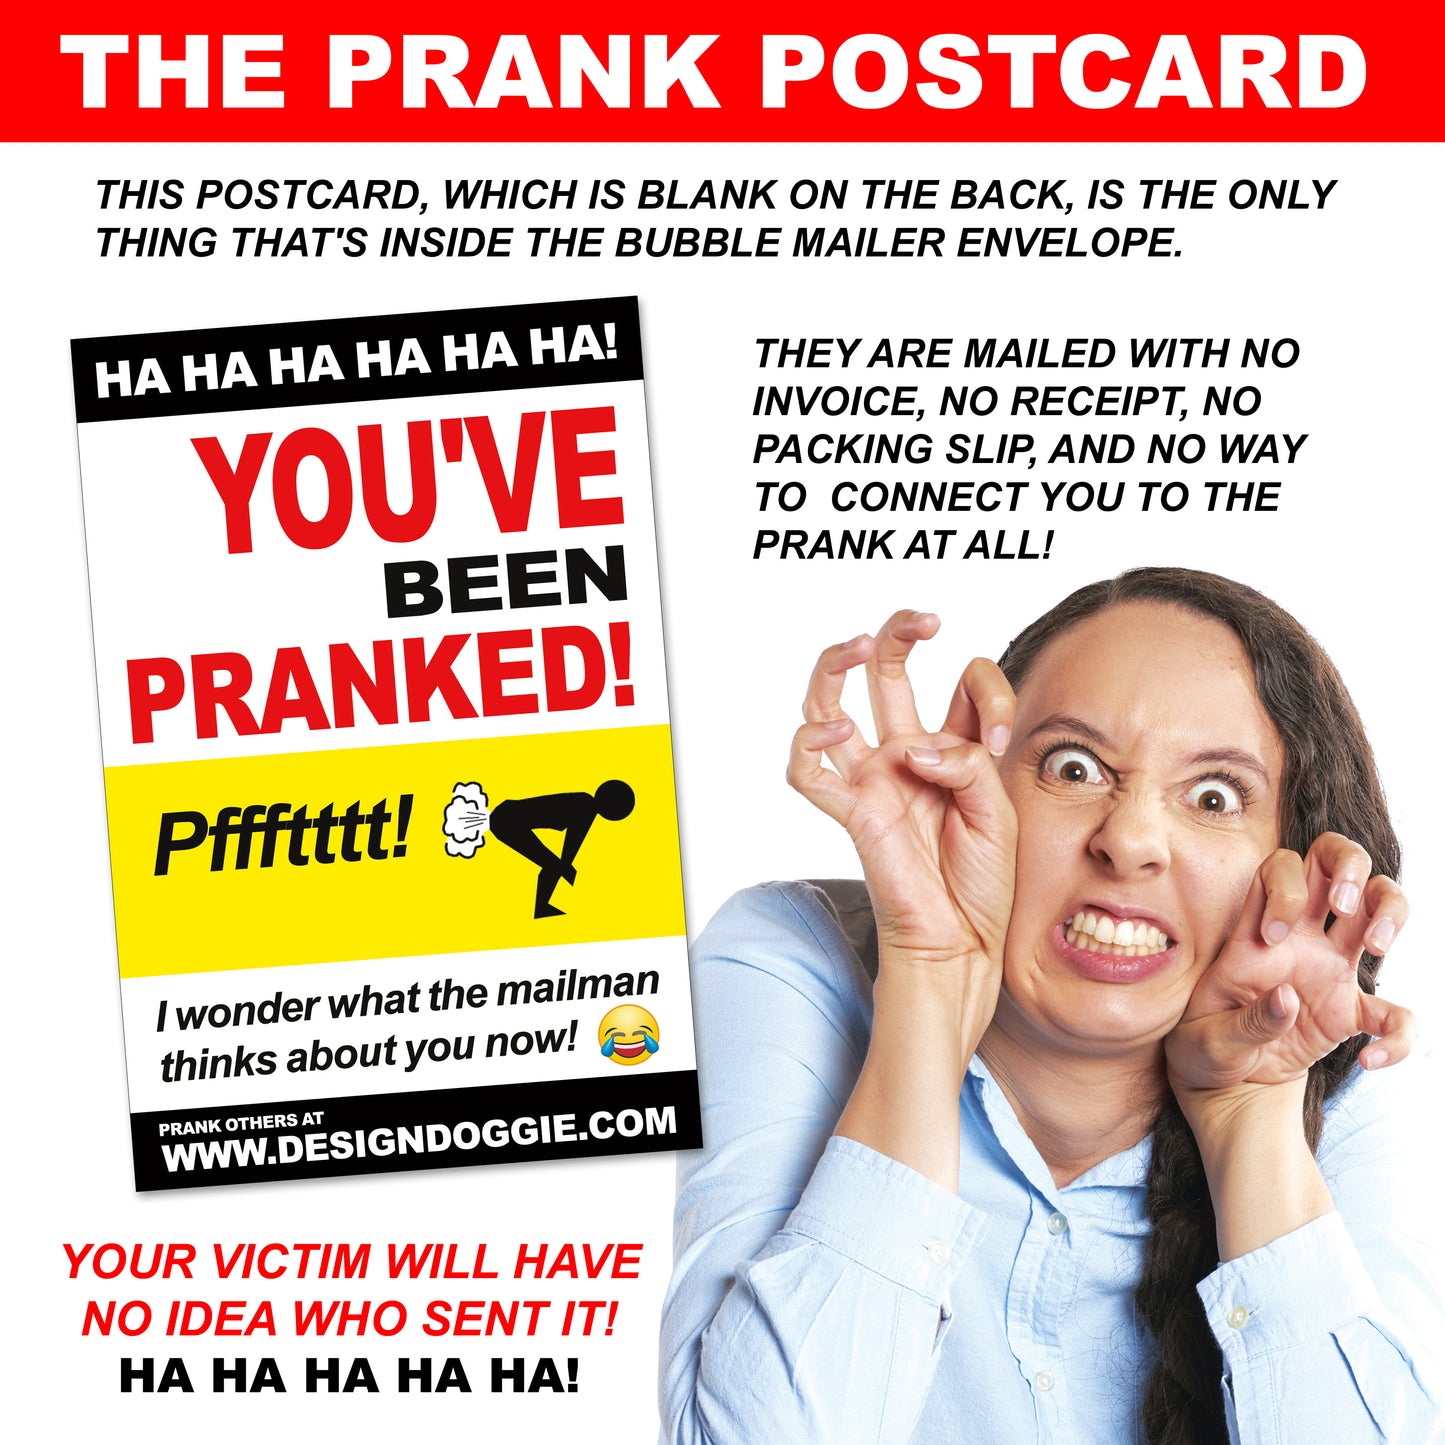 Camping Poop Bags embarrassing prank envelope gets mailed directly to your victims 100% anonymously!